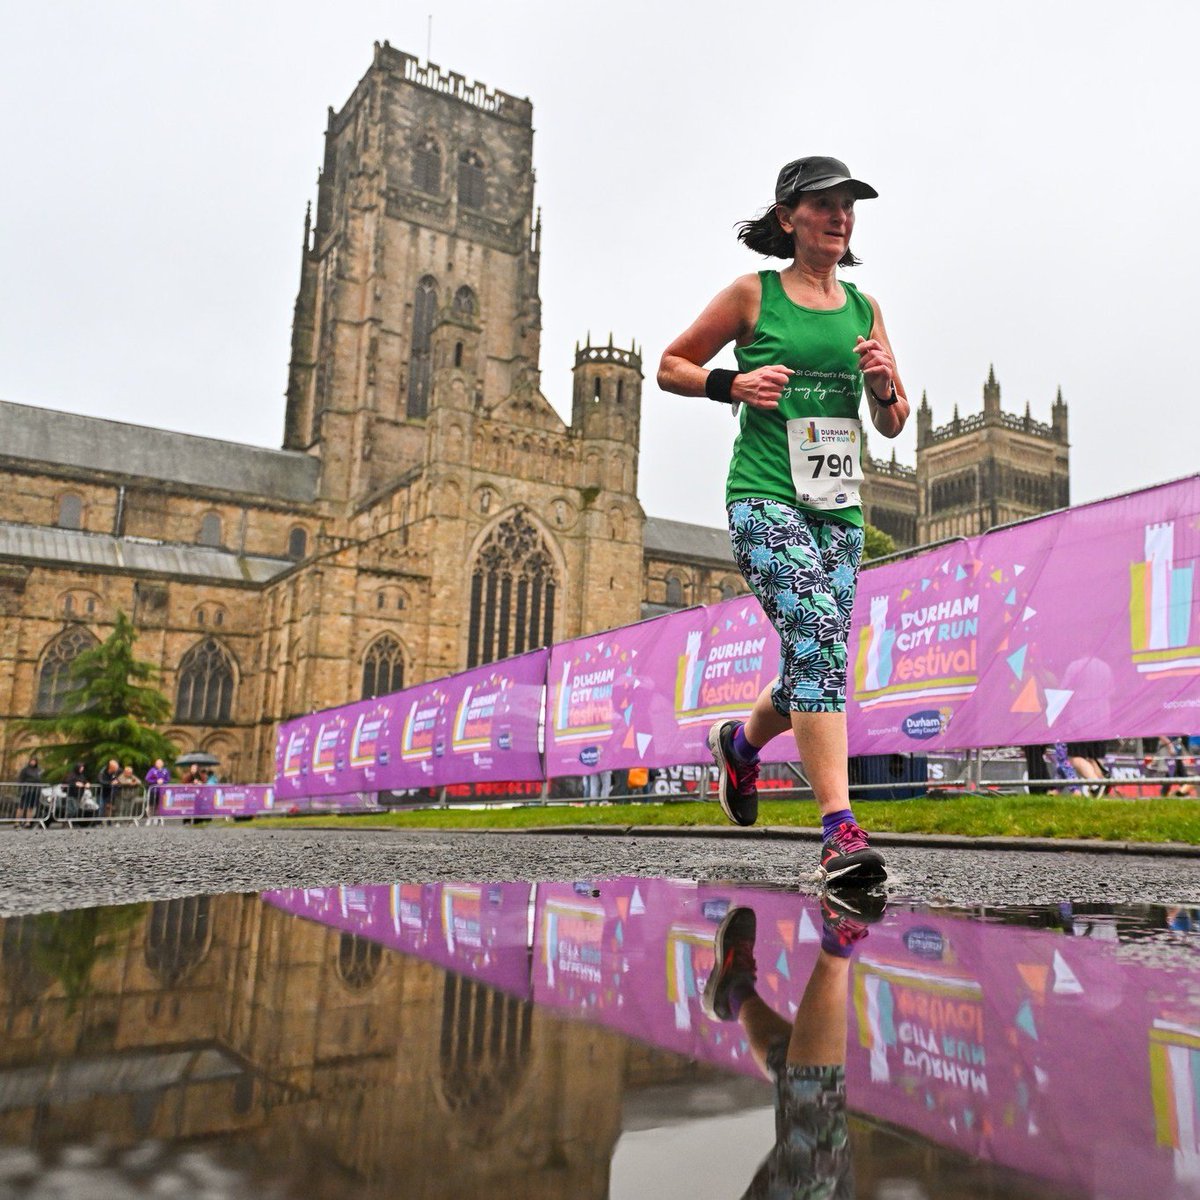 Don't forget that the Durham City Run returns this summer! With several events taking place across the festival, including a families on track event!🏃‍♂️ 📆Thursday 18 July ⏲️5km - 7.00pm ⏲️10km - 7.30pm Find out more: ow.ly/5XtA50Rm4iC